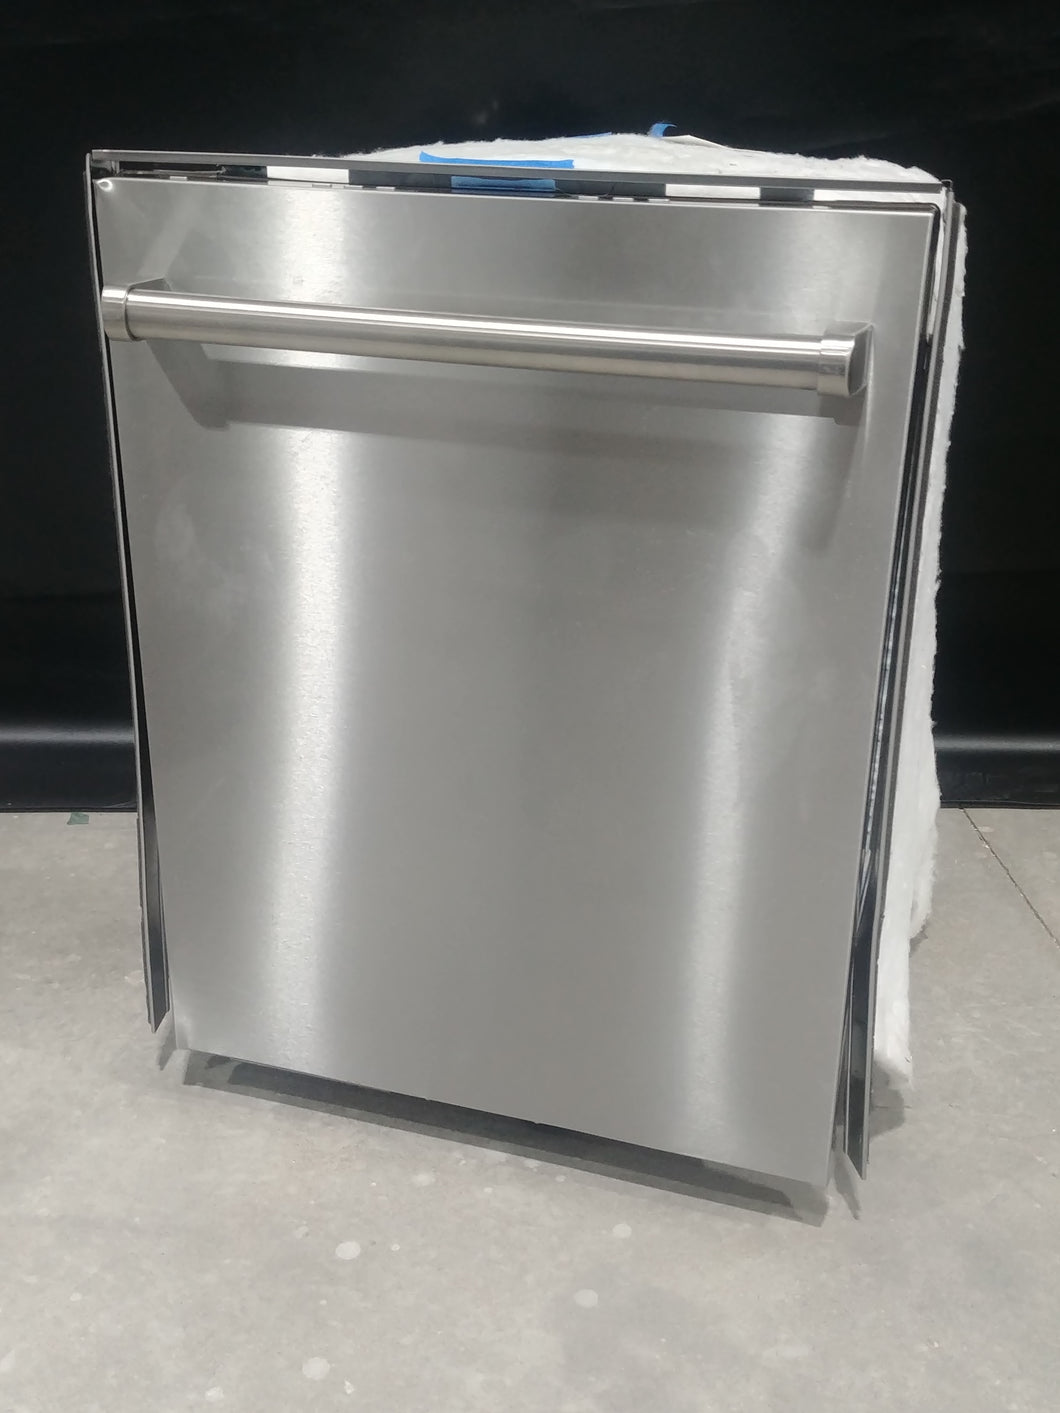 259DW ASKO STAINLESS STEEL DISHWASHER DBI675PHXXLS - IN-STORE PICK-UP ONLY - FreemanLiquidators